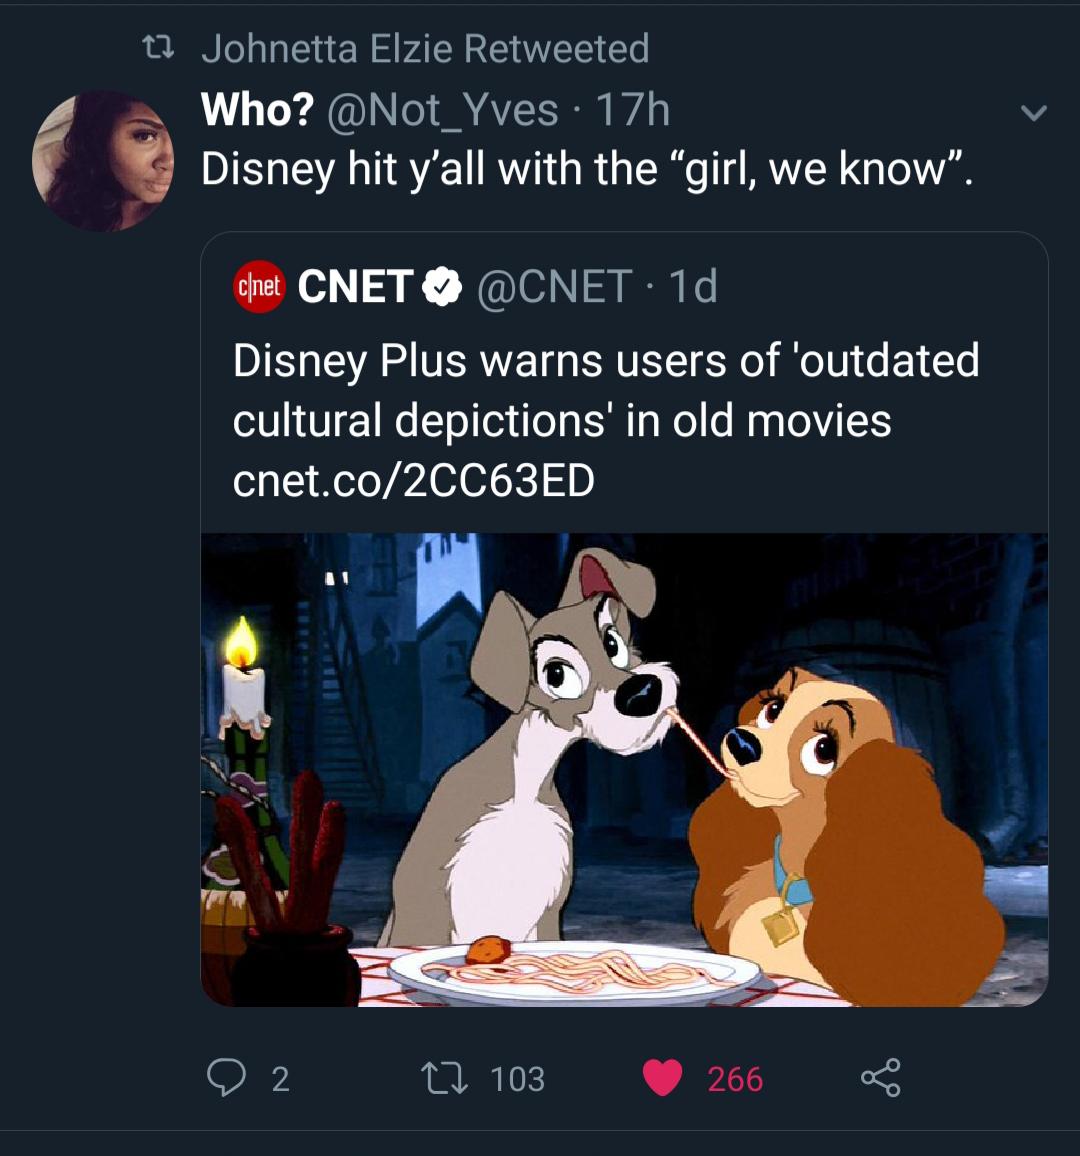 lady and the tramp disney - tz Johnetta Elzie Retweeted Who? 17h Disney hit y'all with the girl, we know". c|net Cnet . 1d Disney Plus warns users of 'outdated cultural depictions in old movies cnet.co2CC63ED O 2 27 103 266 266 @